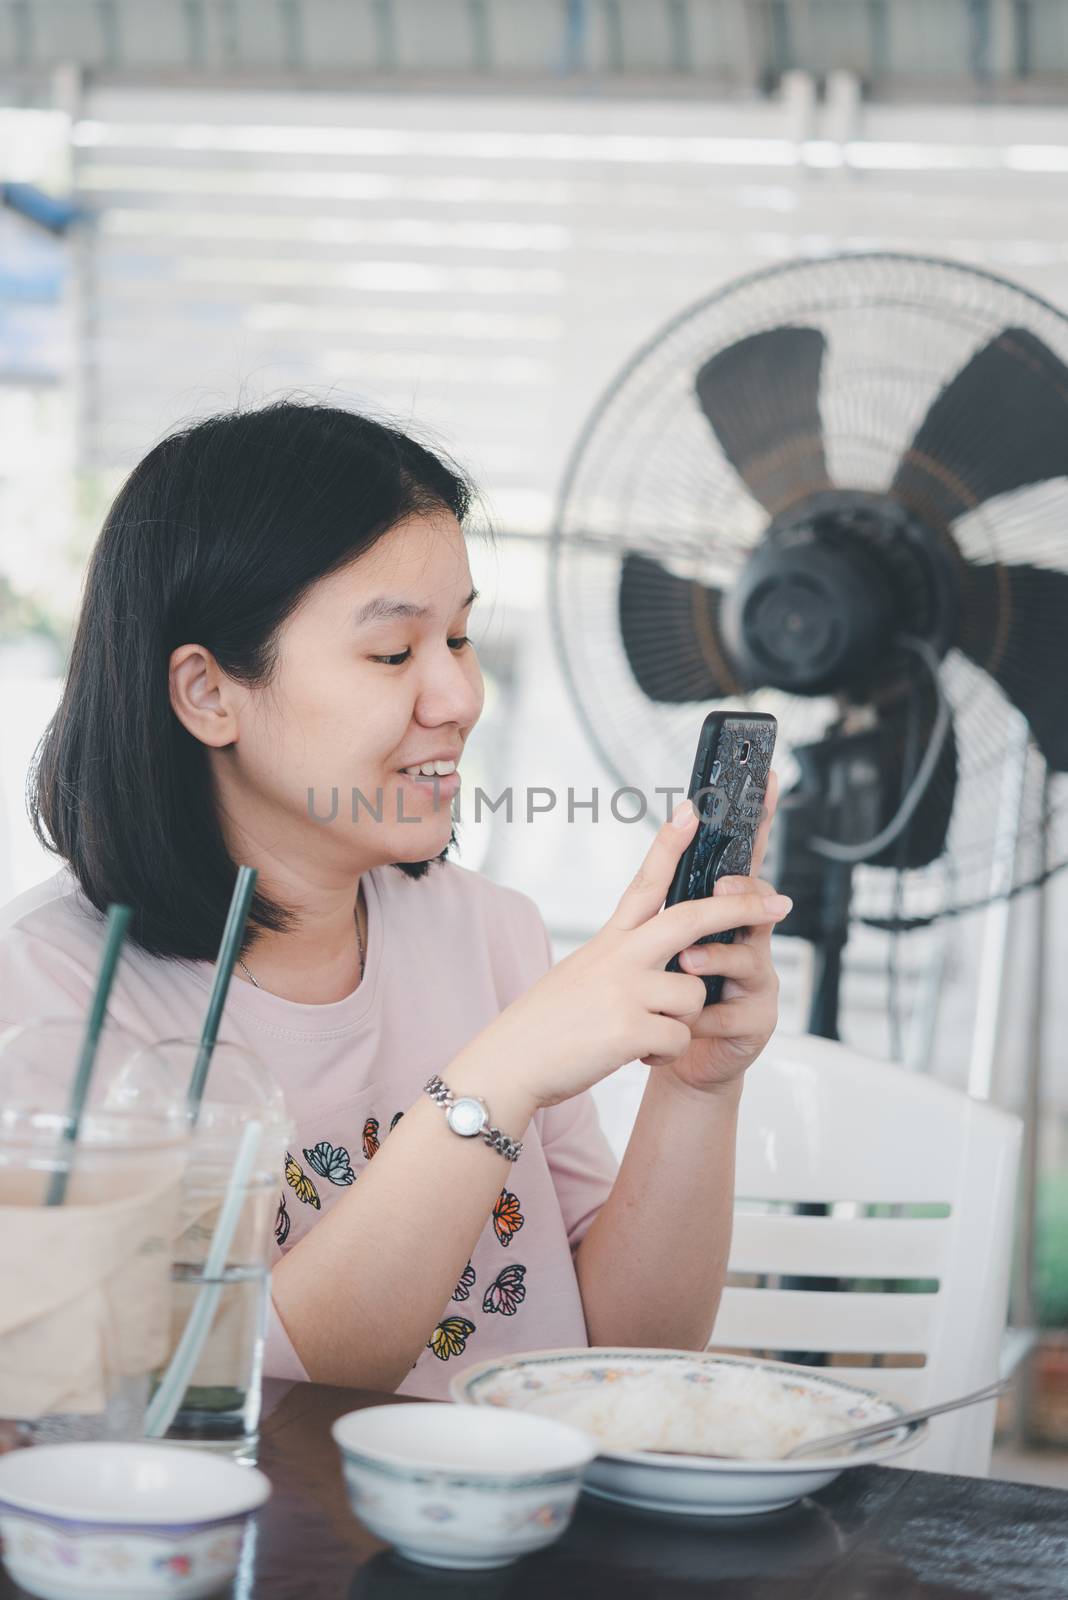 Woman foodstagram photographing a food for share by PongMoji